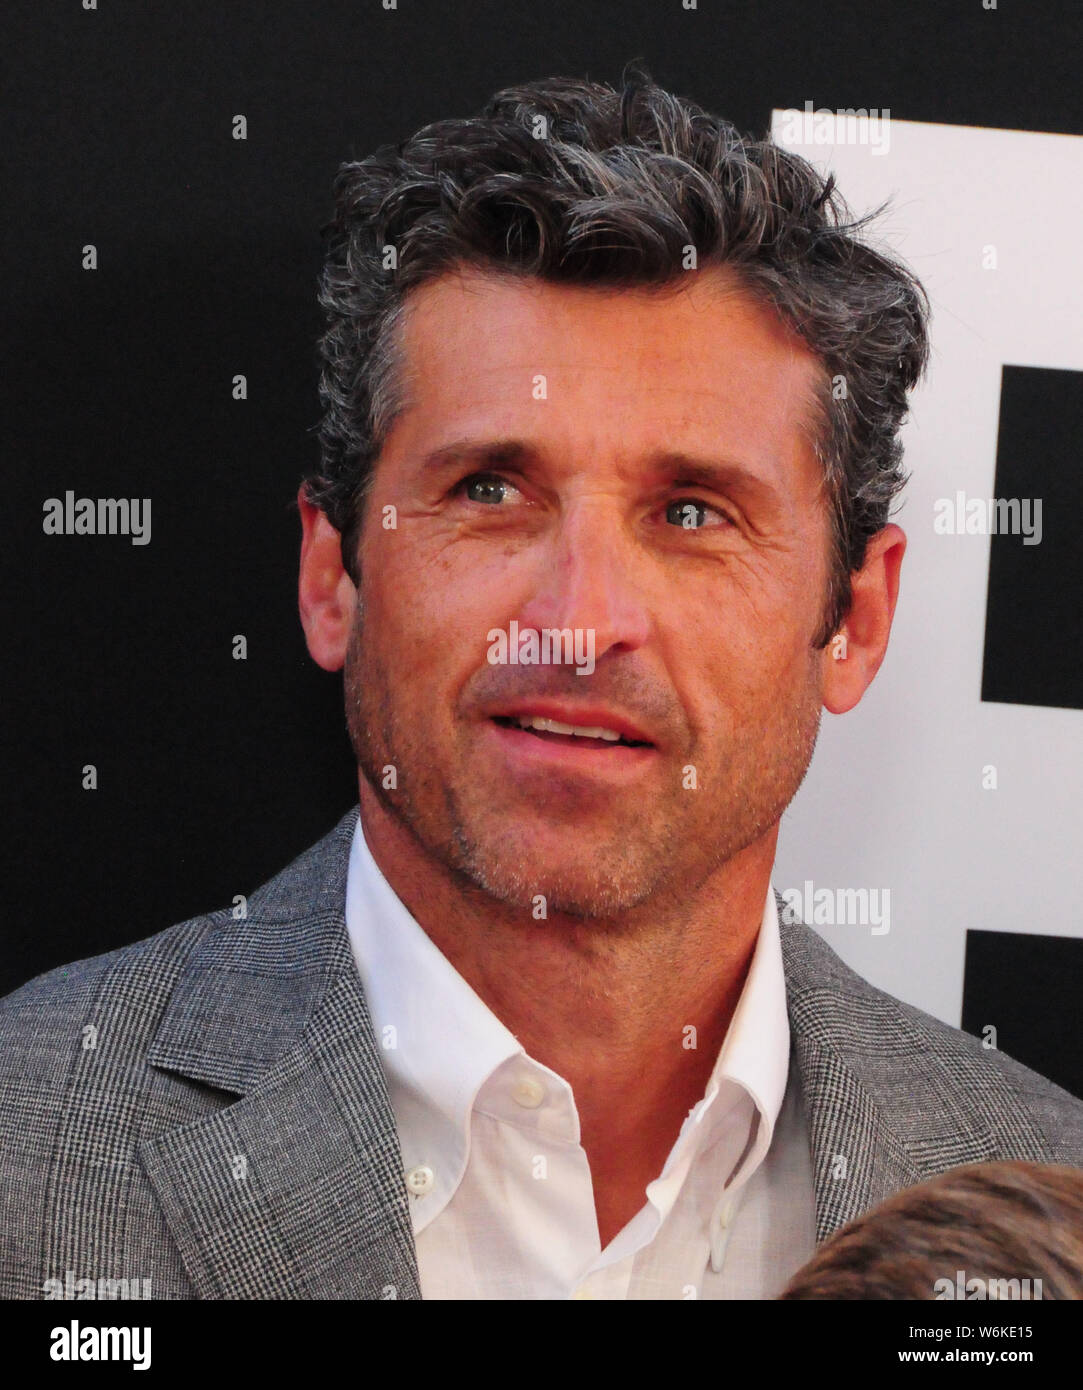 Hollywood, California, USA 1st August 2019 Producer/actor Patrick Dempsey attends 20th Century Fox's World Premiere of 'The Art Of Racing In The Rain' on August 1, 2019 at the El Capitan Theatre in Hollywood, California, USA. Photo by Barry King/Alamy Live News Stock Photo